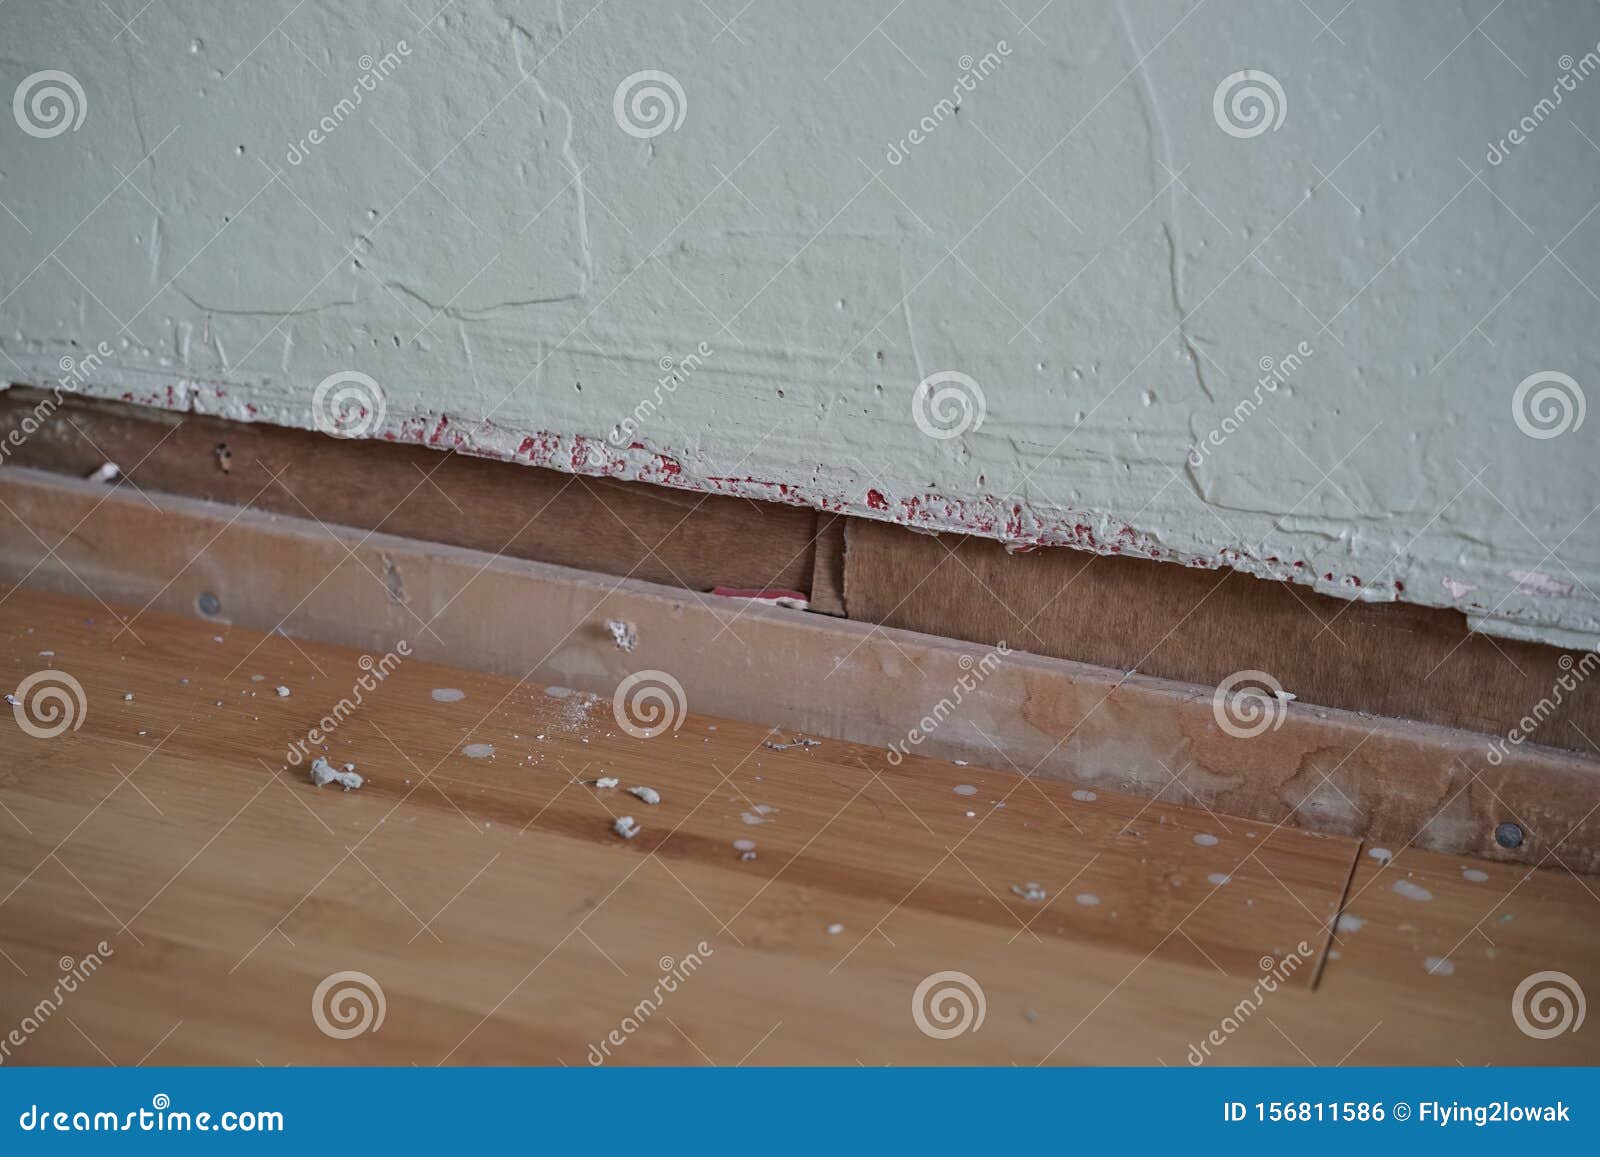 Wall And Floor With No Trim Attached To Wall Stock Photo Image